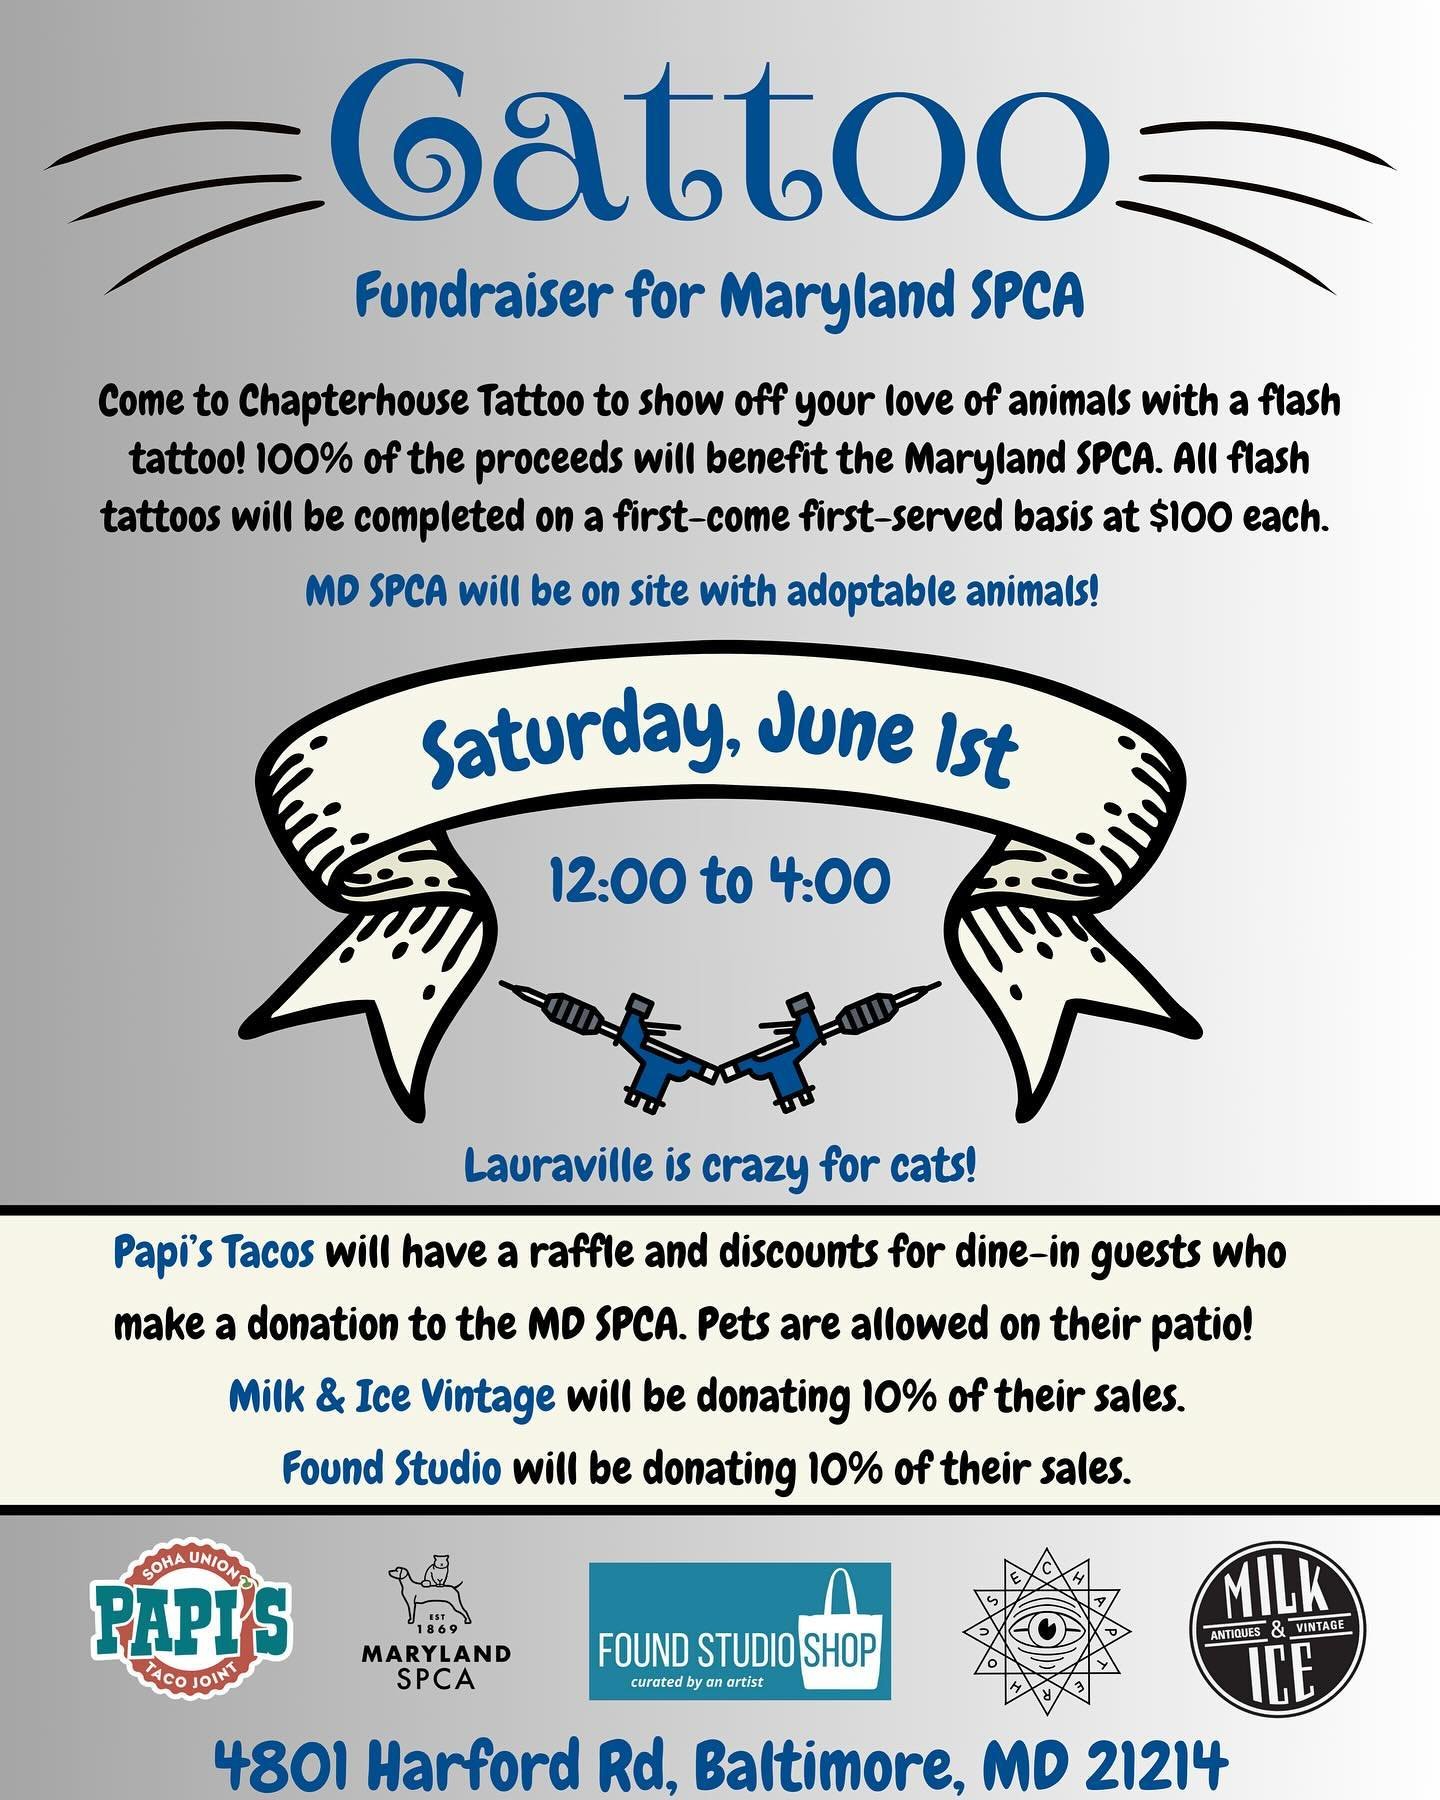 Save the date!! On June 1st we will be doing a flash event to benefit the @mdspca! Tattoos will be done on a walk-in first come first served basis, and 100% of the proceeds will be donated! @milkandicevintage will also be donating 10% of their sales 